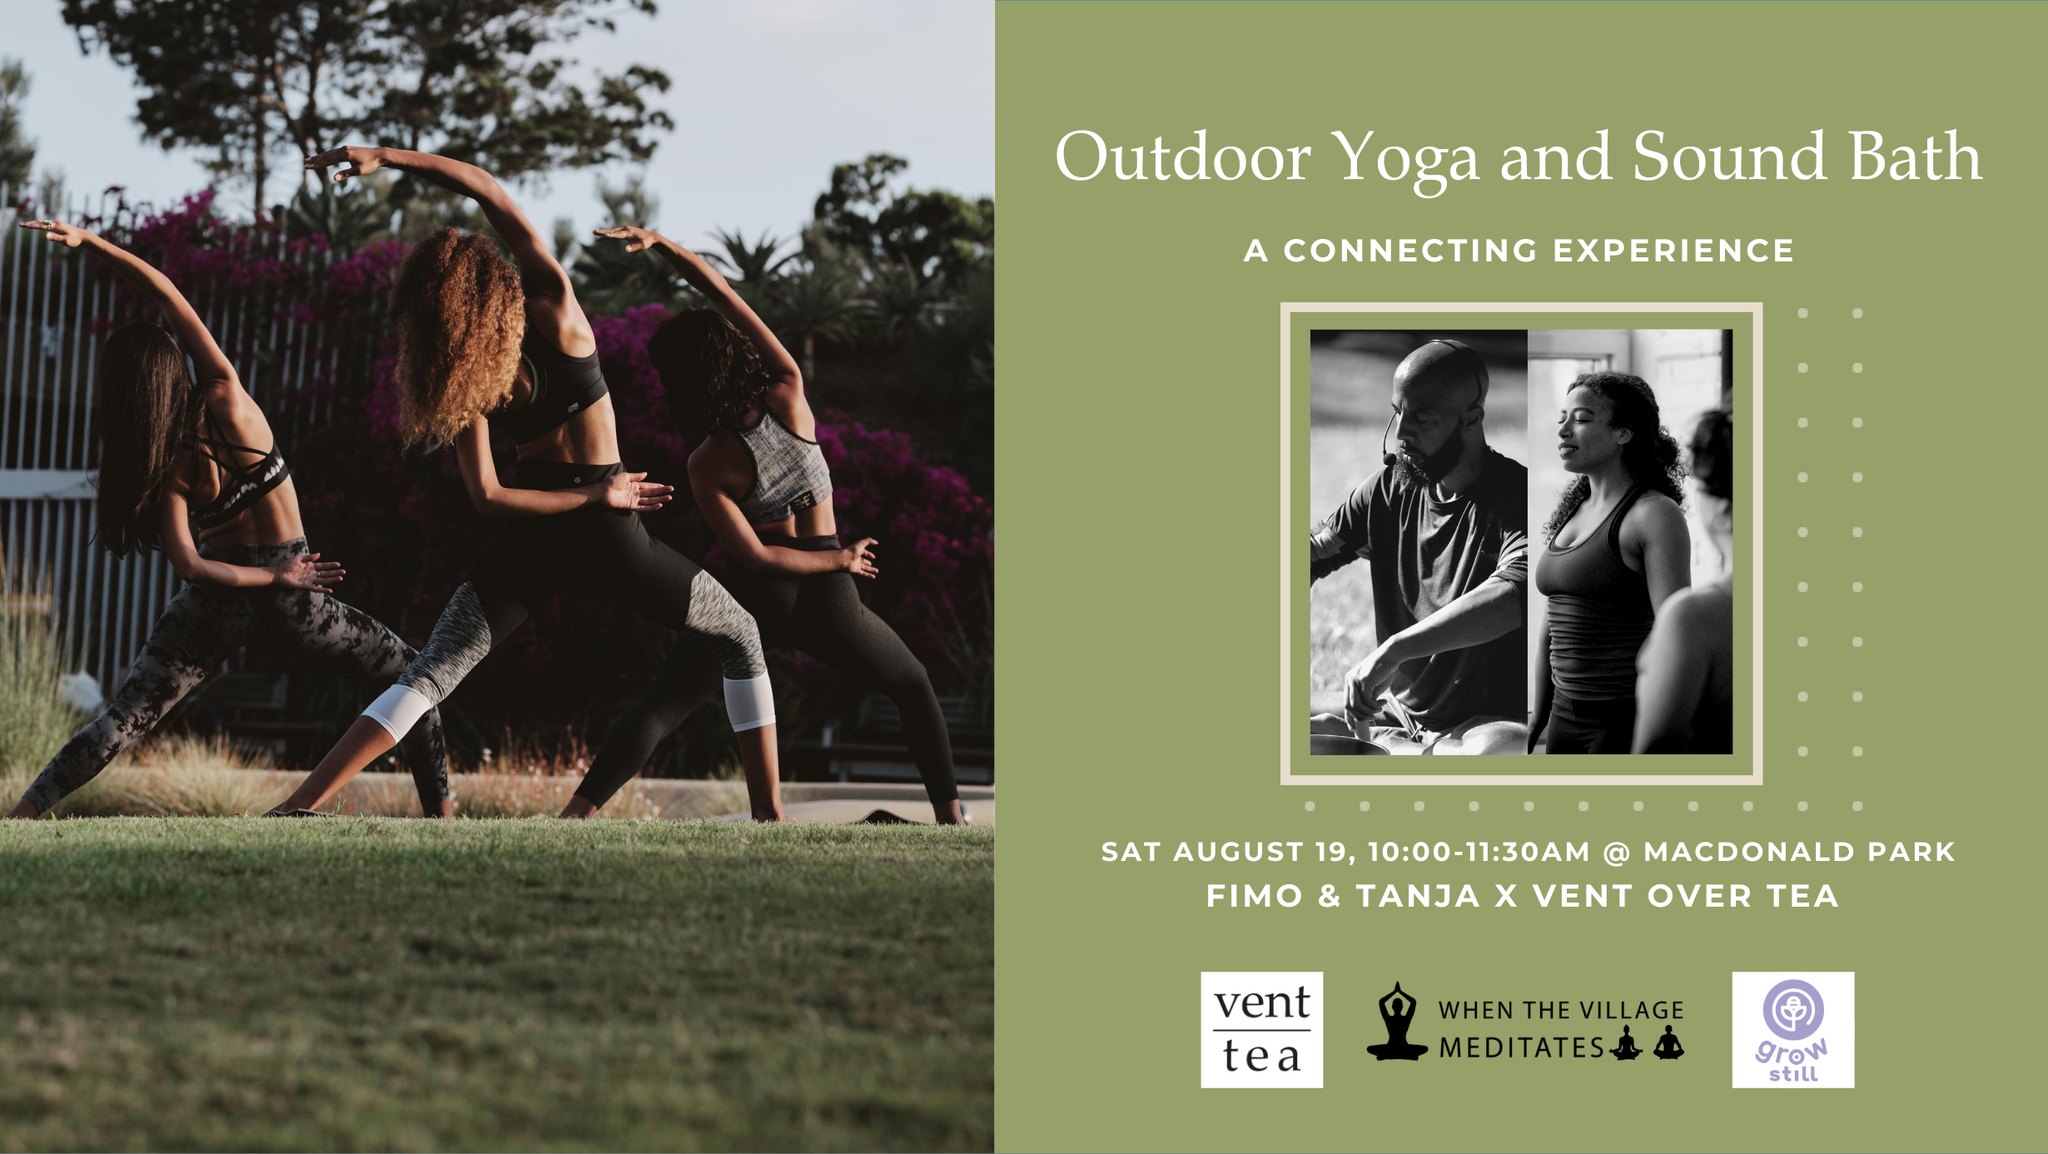 Outdoor Yoga and Sound Bath: A Connecting Experience